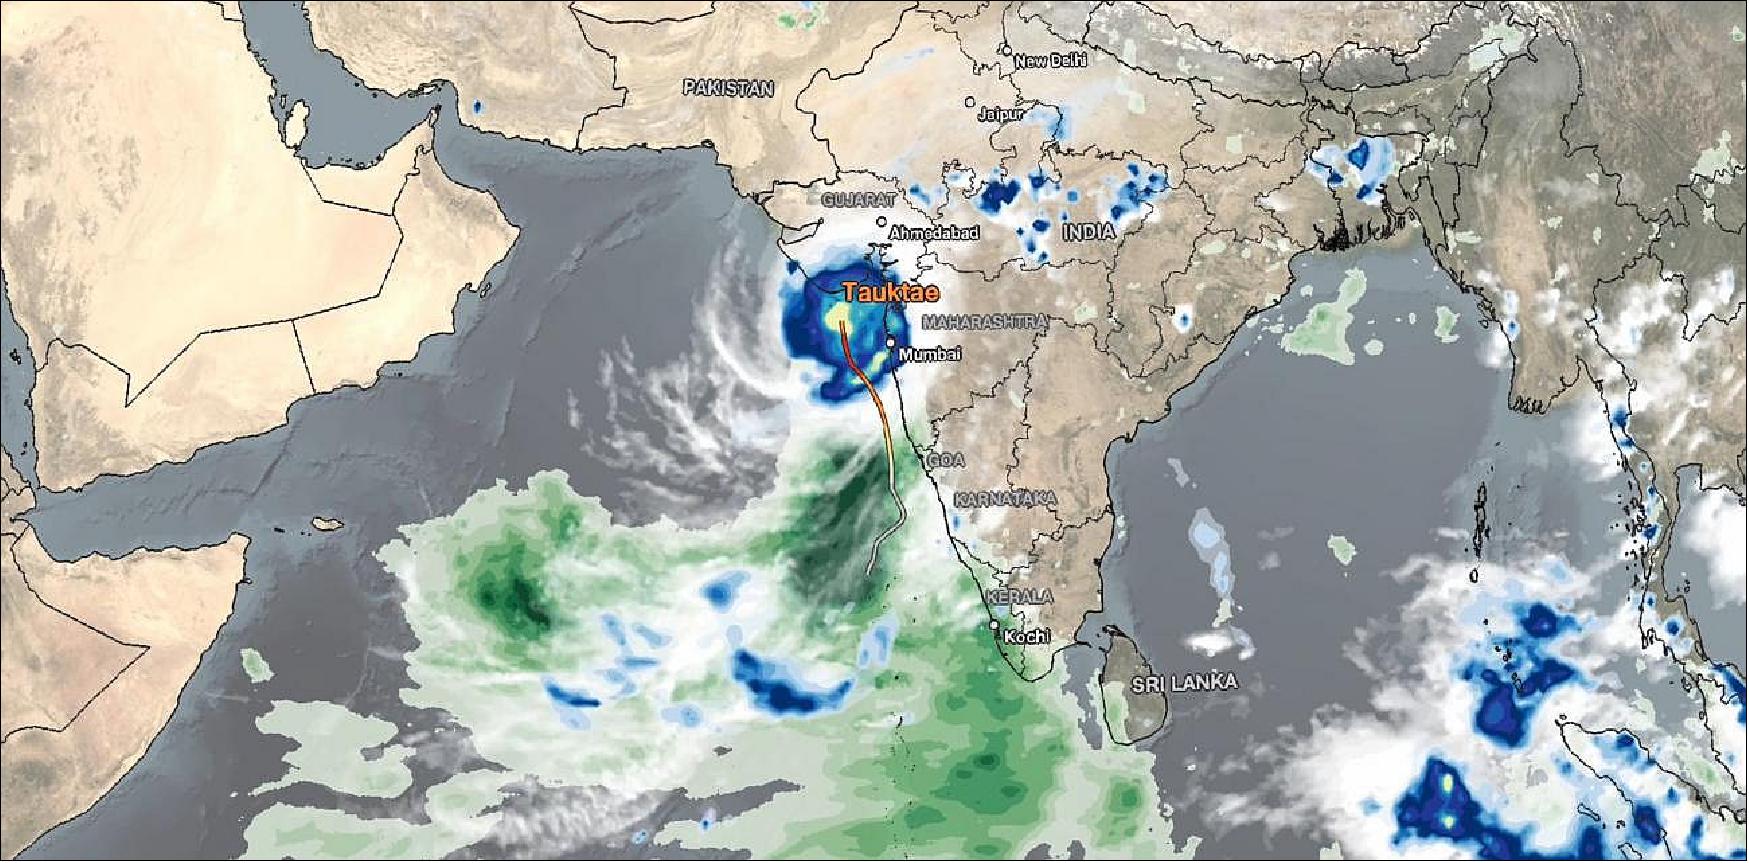 Figure 18: In mid-May, the tropical cyclone Tauktae approached the west coast in India (image credit: NASA)